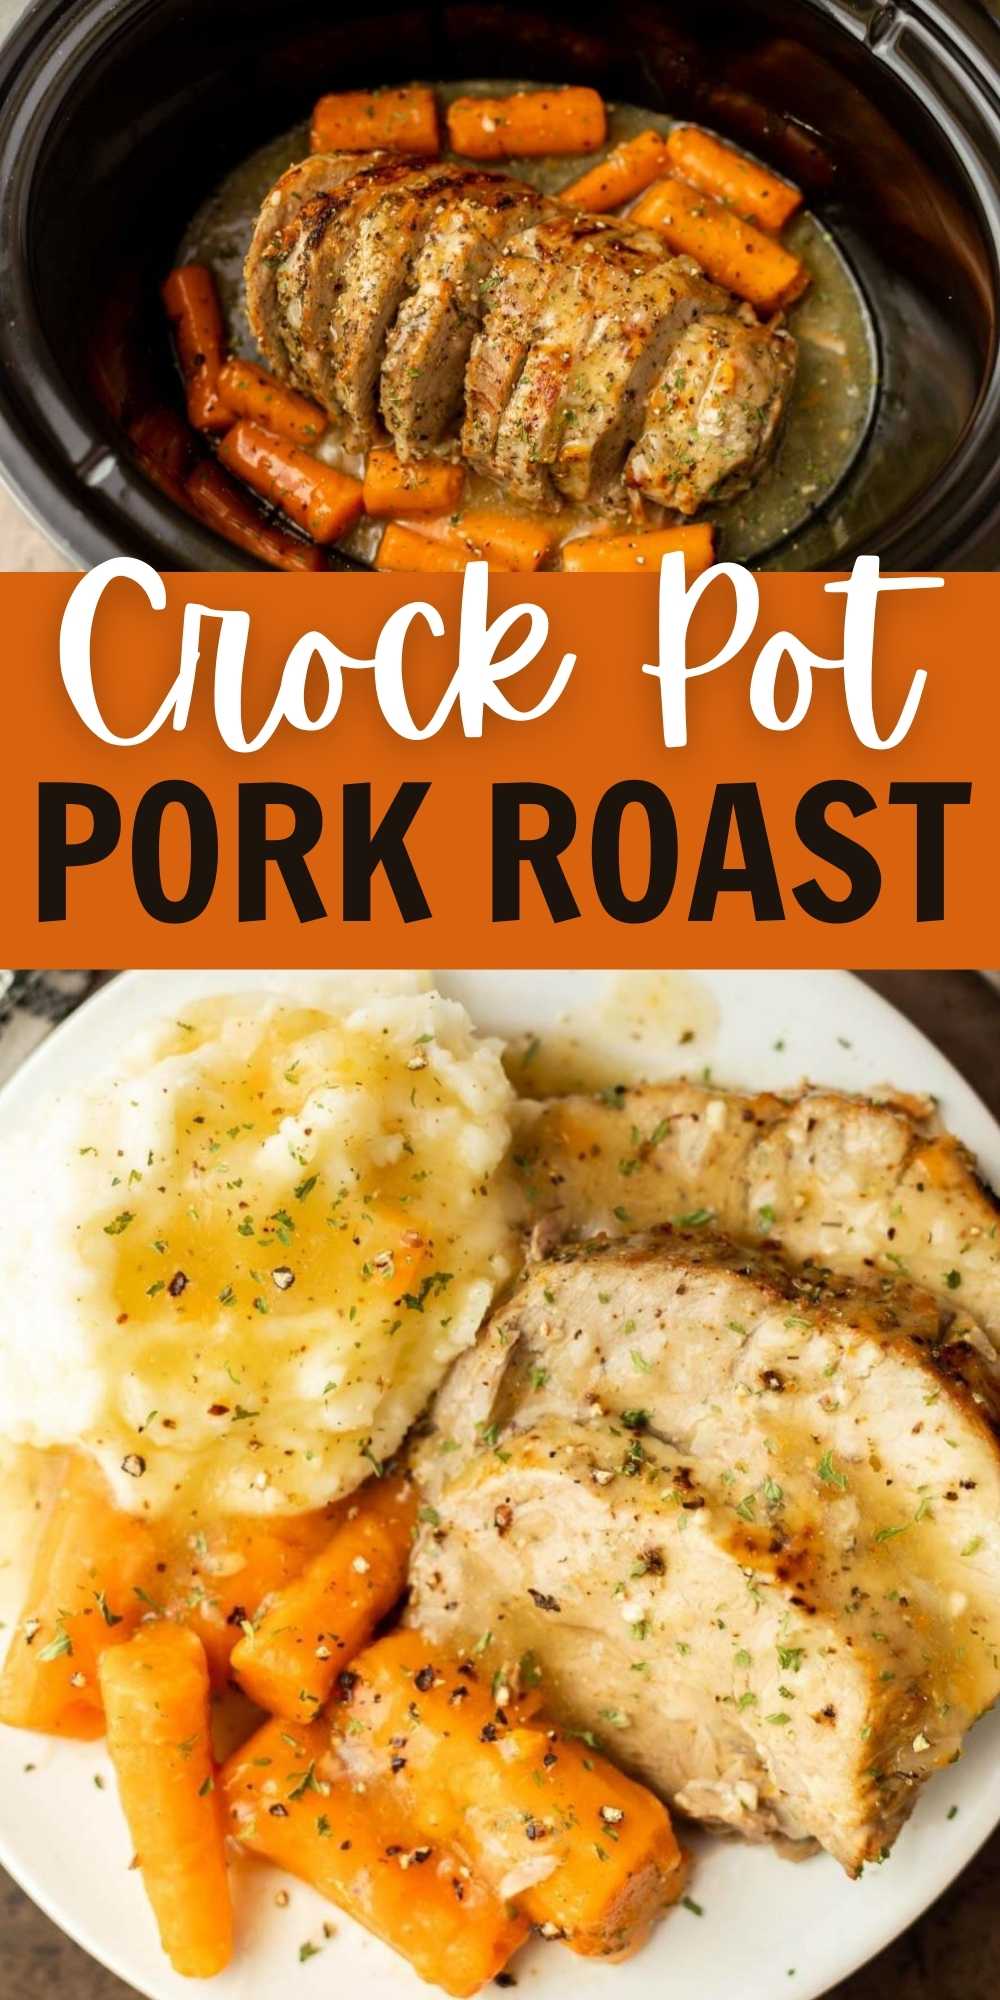 This clay pot pork roast is tender and delicious with very little work. Pork gets rid of being cooked slowly all day and tastes amazing. Learn how to make this slow cooker pork roast with vegetables and with sauce. It's easy to make and delicious too! #eatingonadime #crockpotrecipes #slowcookerrecipes #porkrecipes